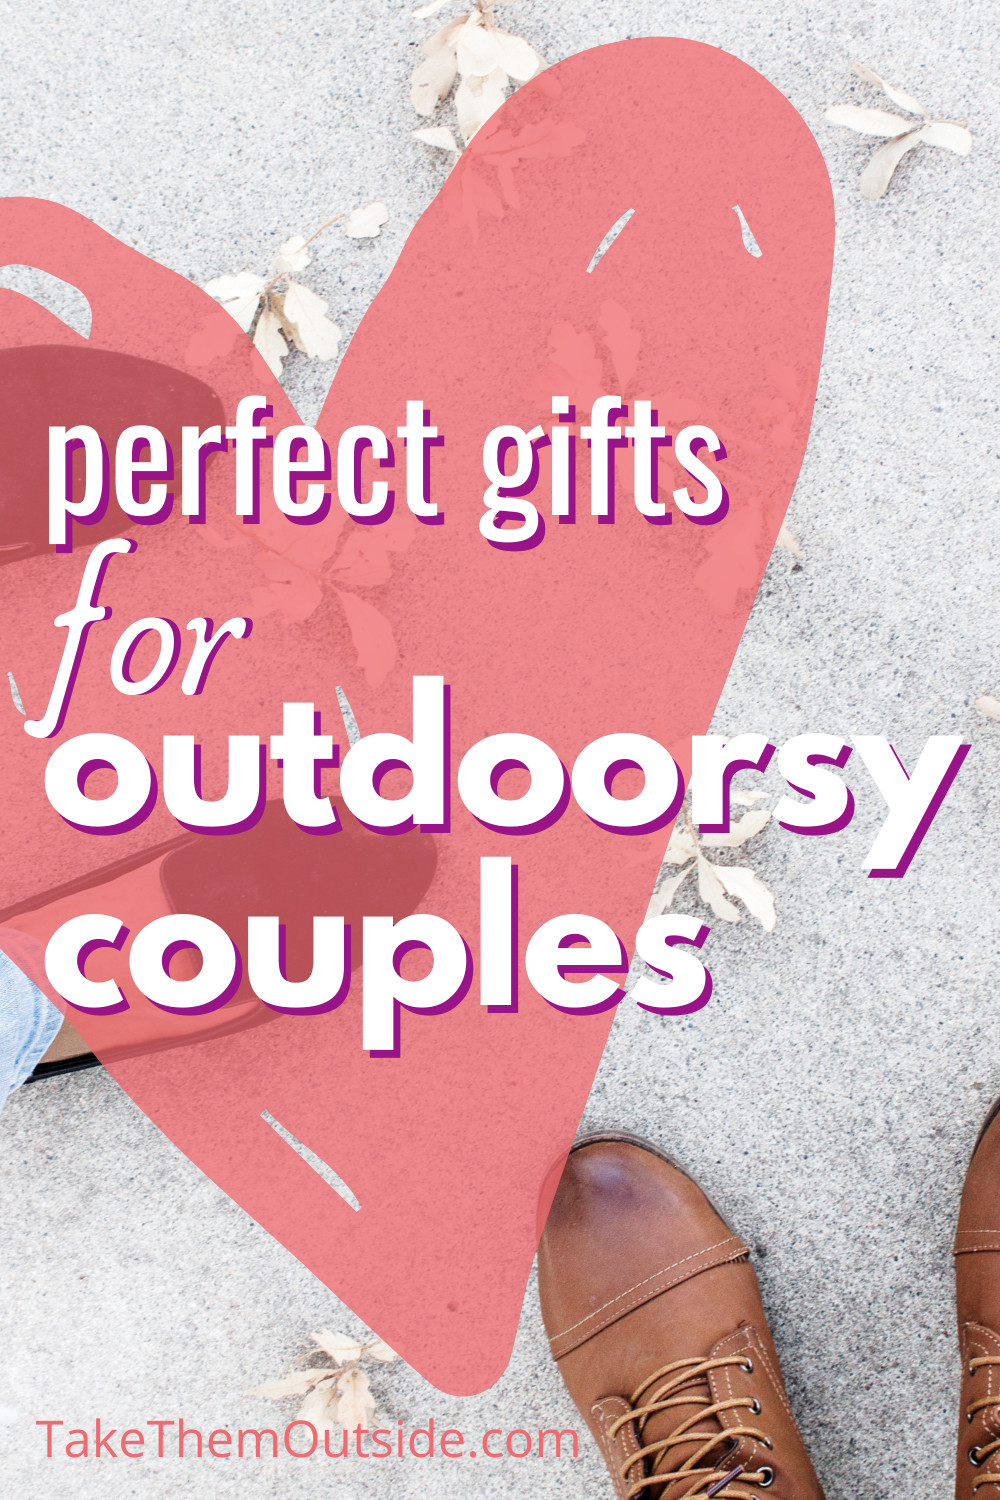 Wedding Gift Ideas For Outdoorsy Couple
 Camping ts for Couples for weddings or the holidays